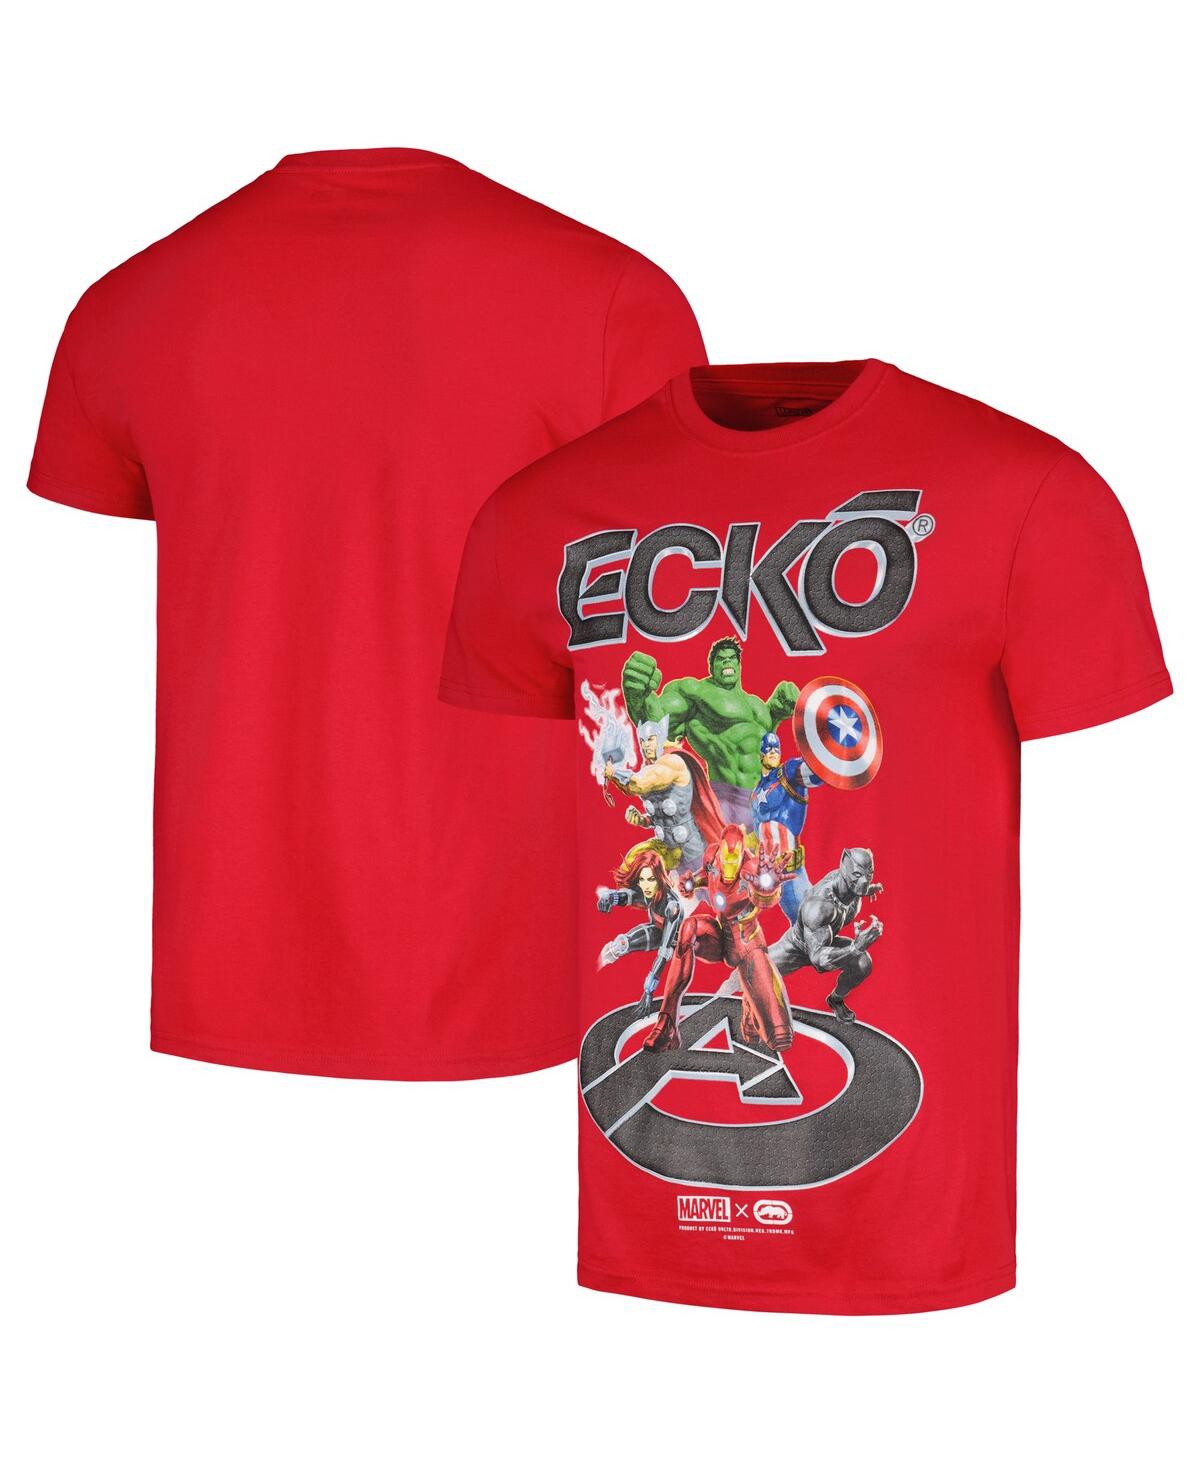 Men's and Women's Ecko Unlimited Red The Avengers Full Send T-shirt - Red